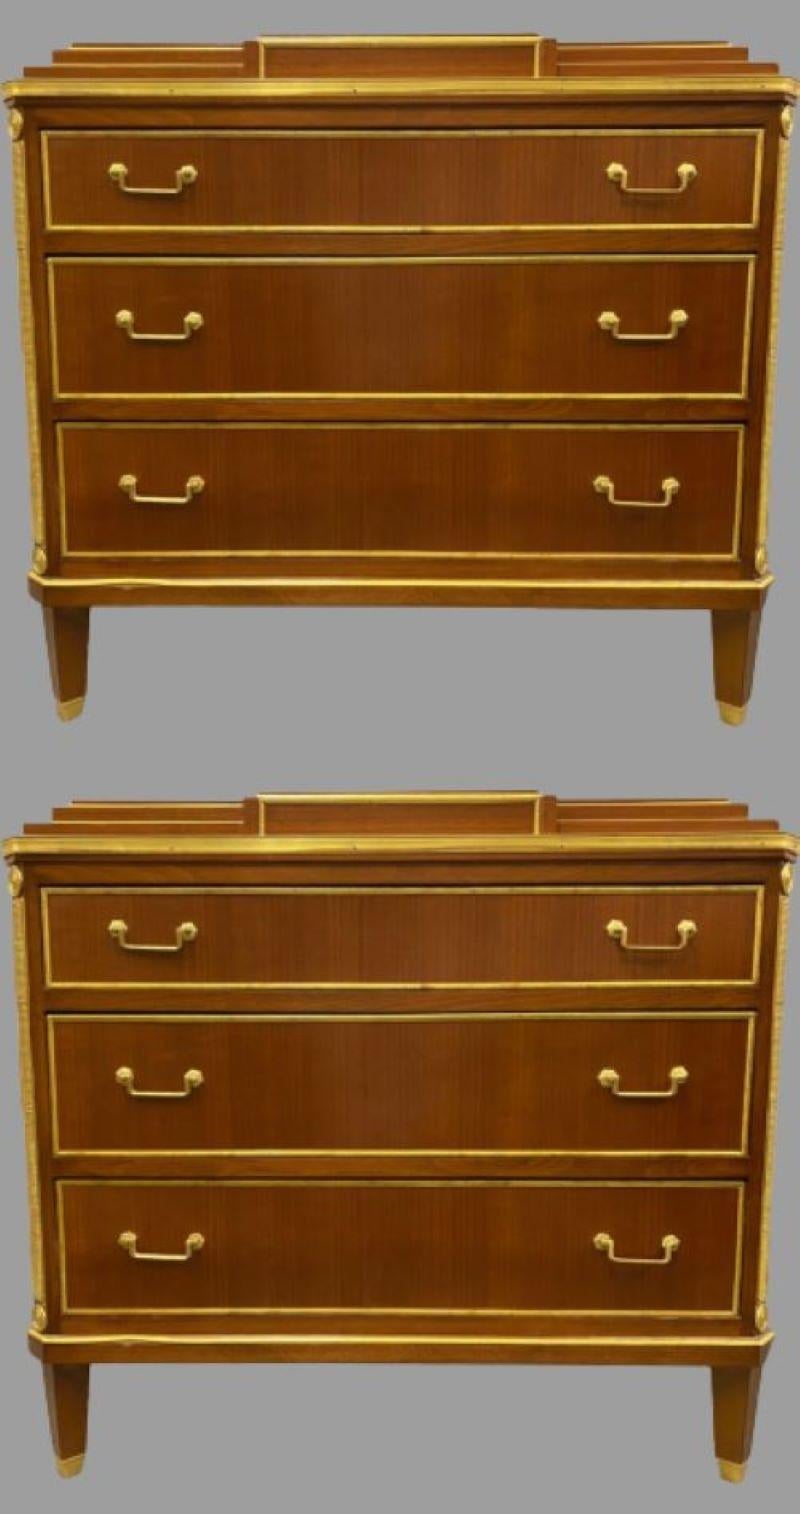 Pair of mahogany double step up Russian neoclassical style commodes. Each of these custom quality commodes have fine polished mahogany finishes decorated with bronze mounts. The tapering legs with bronze sabots support a three drawer bronze framed